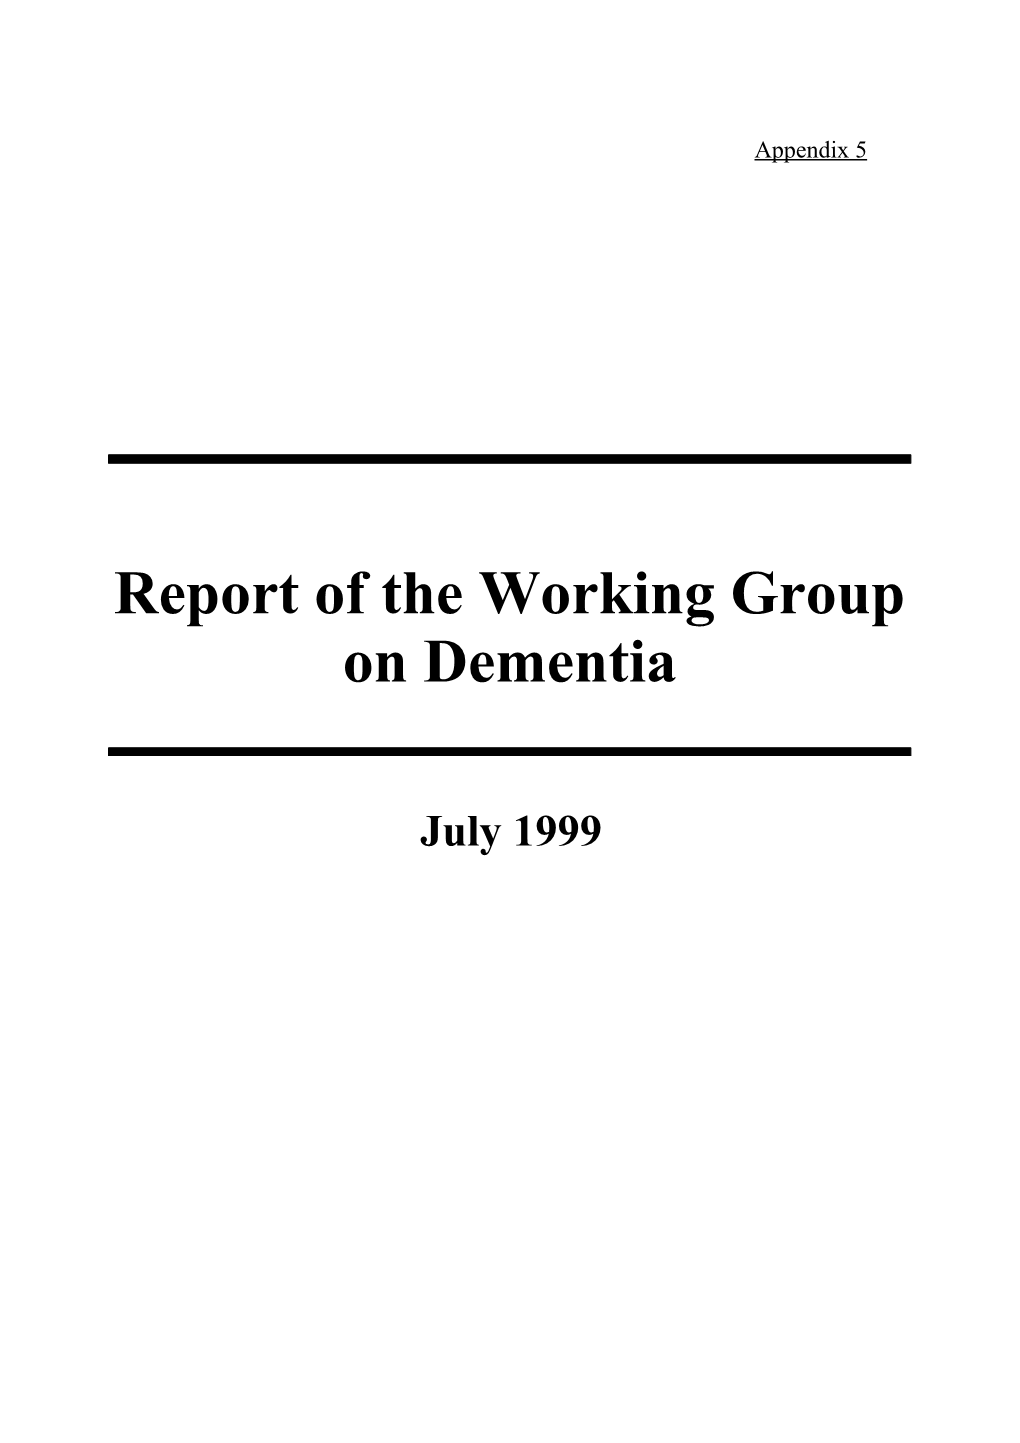 Report from Working Group on Dementia